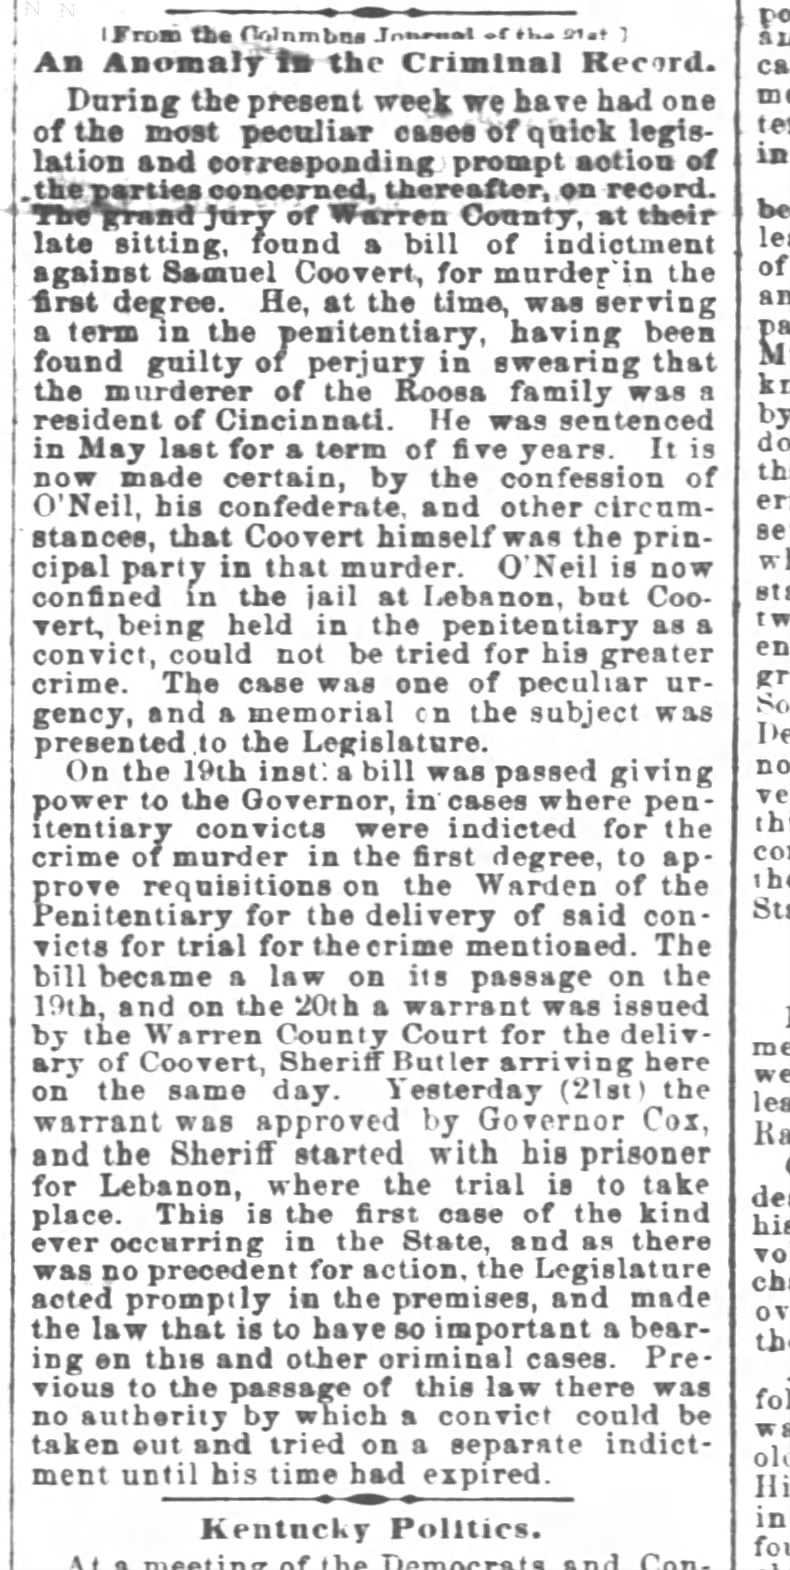 Cincinnati Enquirer
23 February 1866
The bill to get Covert out of penitentiary